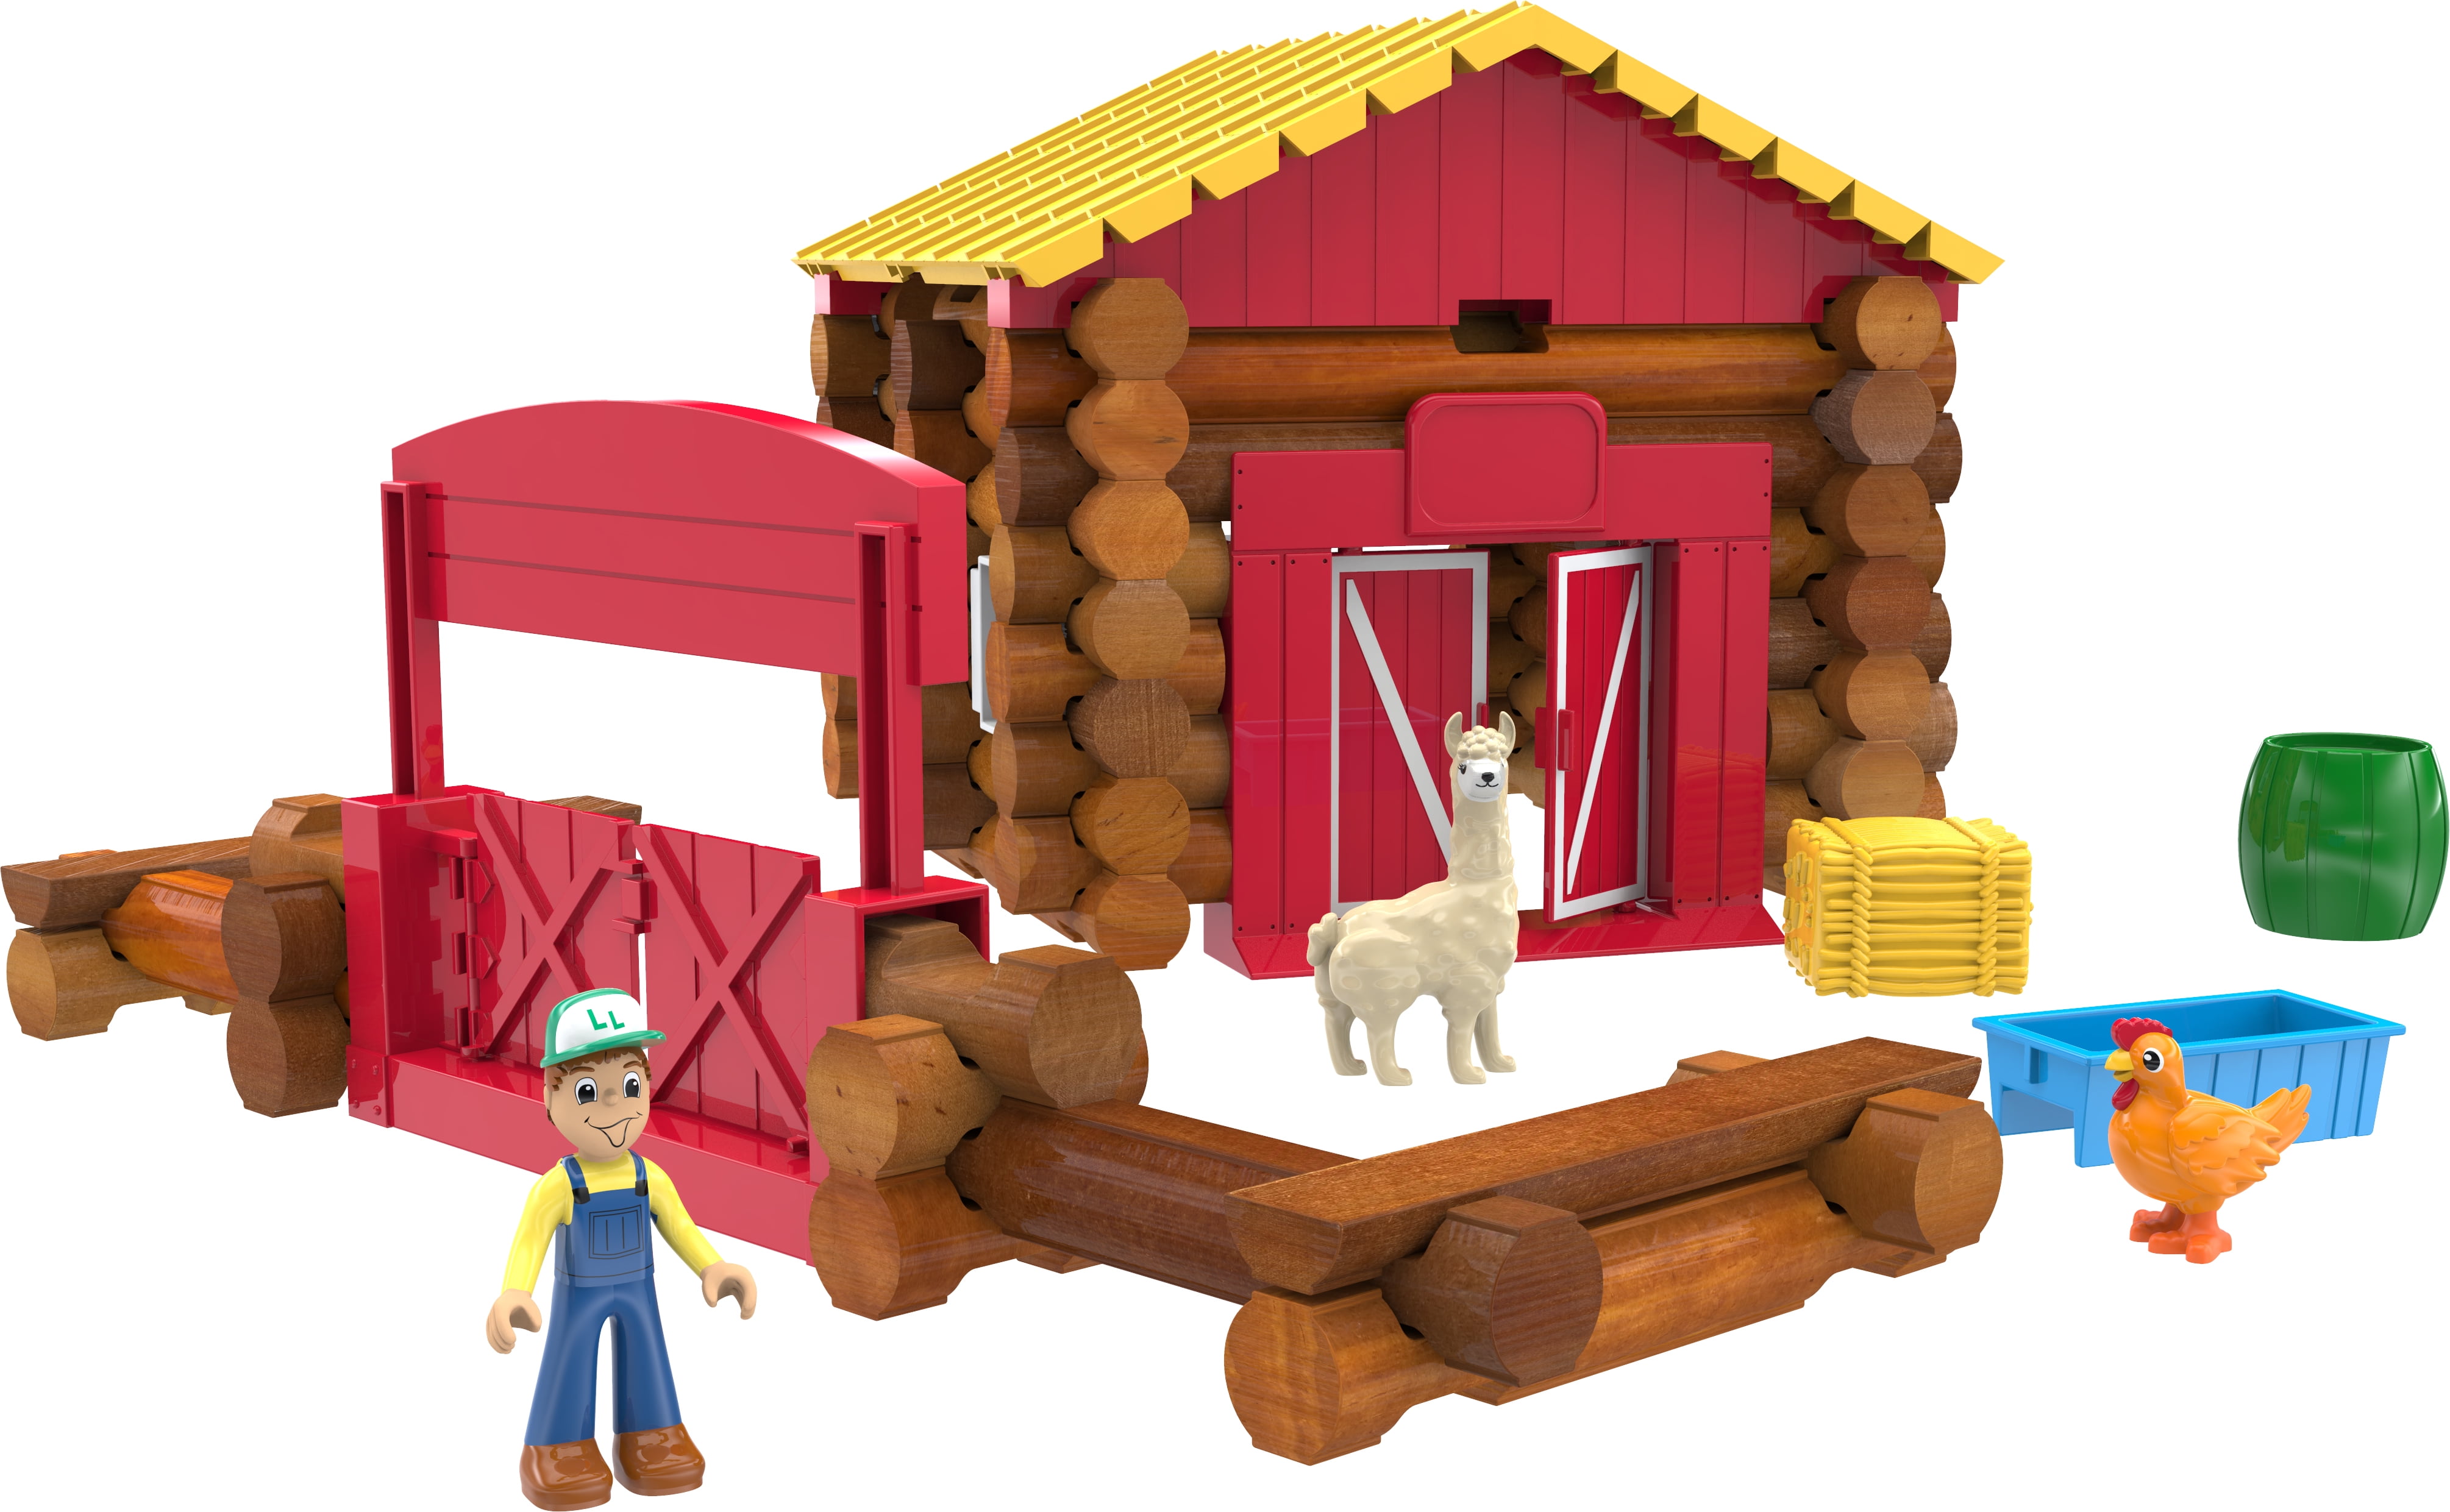 As 3 & Up 102 Parts Real Wood Logs Lincoln Logs Fun On The Farm 